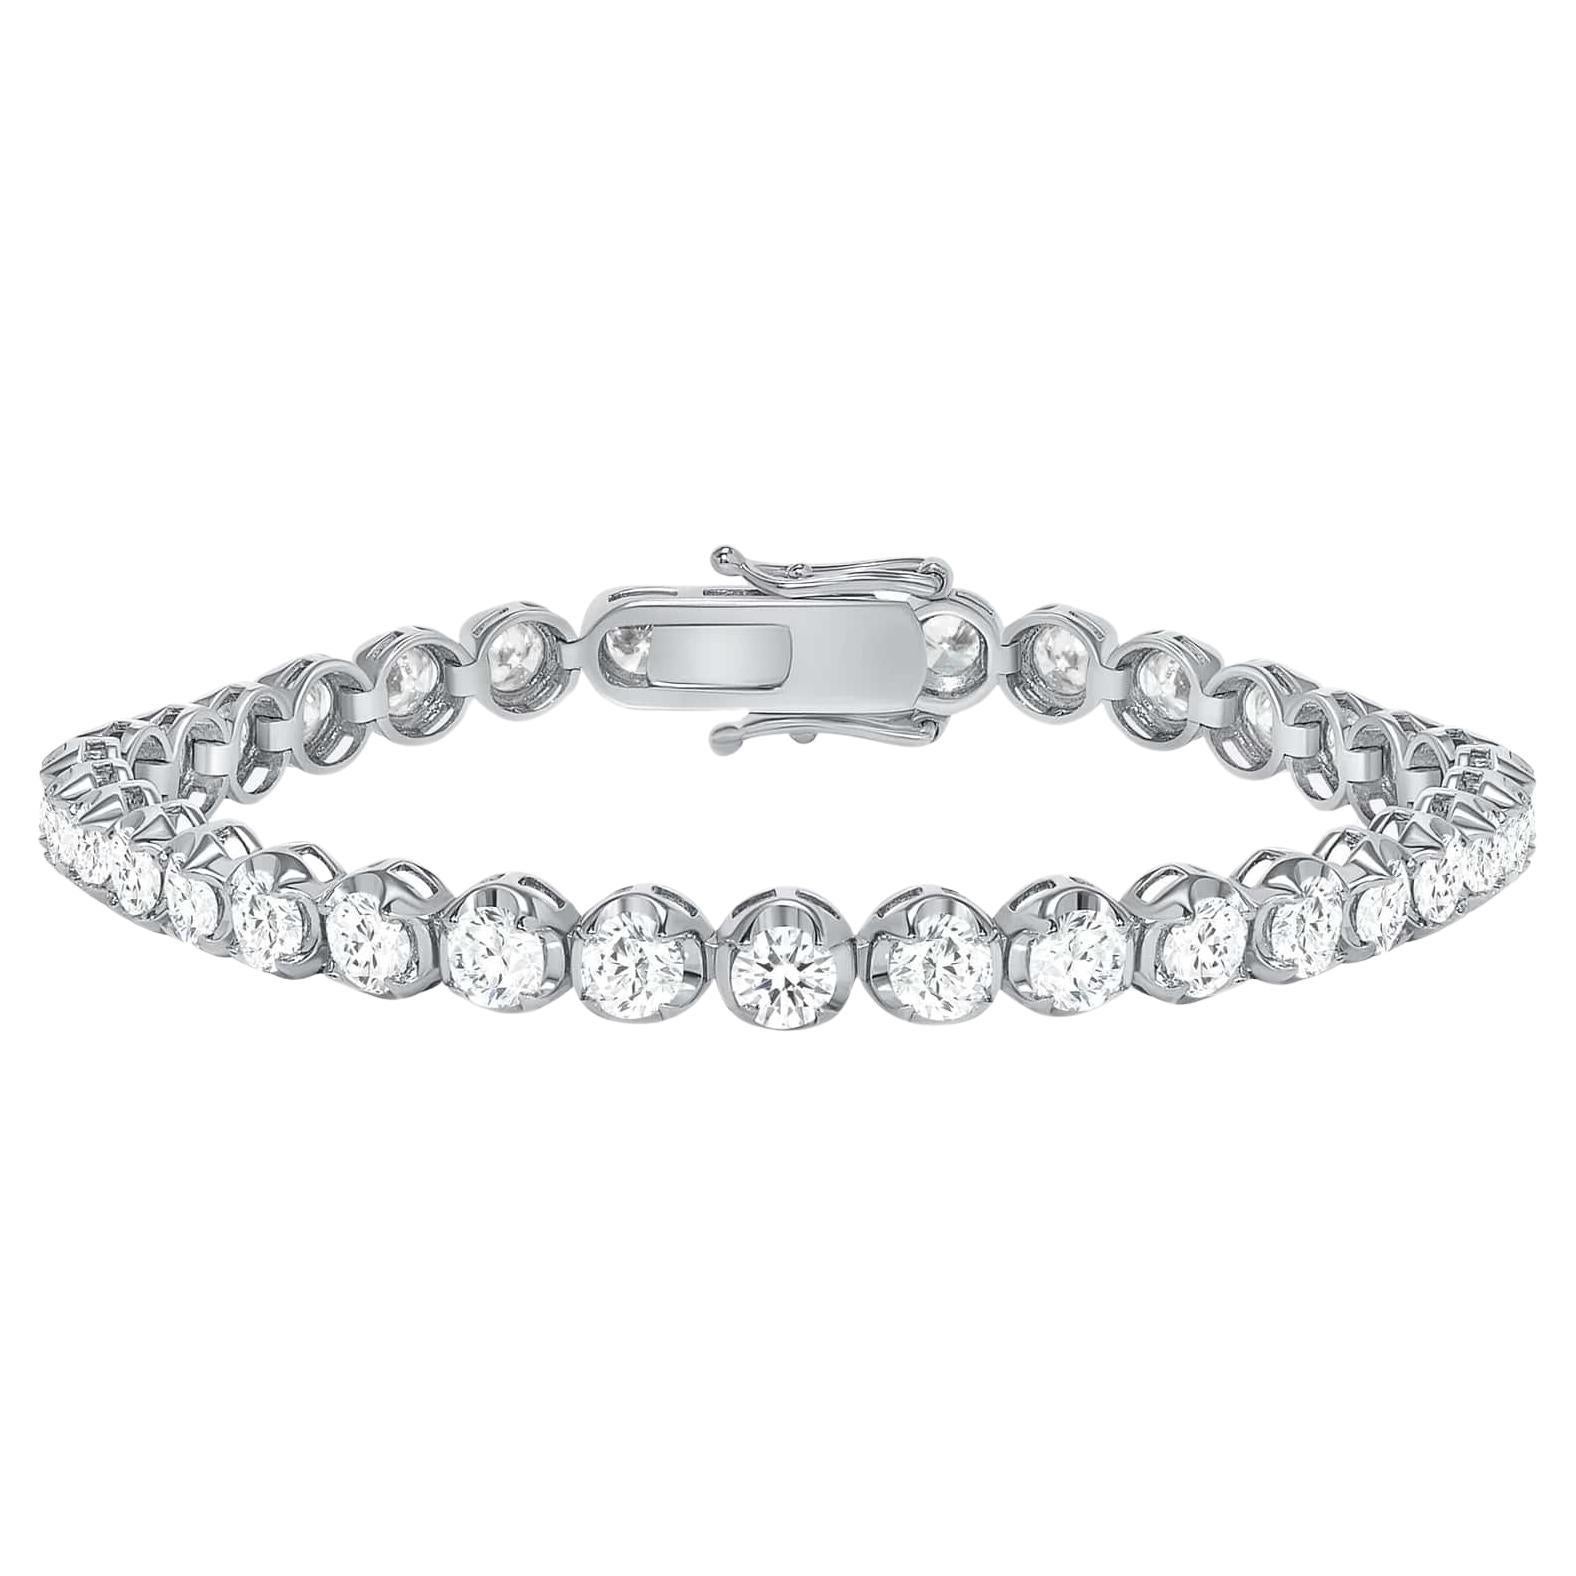 These beautiful round diamonds dance around your wrist as they absorb light and attention

Bracelet Information
Metal : 14k Gold
Diamond Cut : Round
Diamond Total Carats : 3ttcw
Diamond Clarity : VS -SI
Diamond Color : F-G
Color : White Gold, Yellow